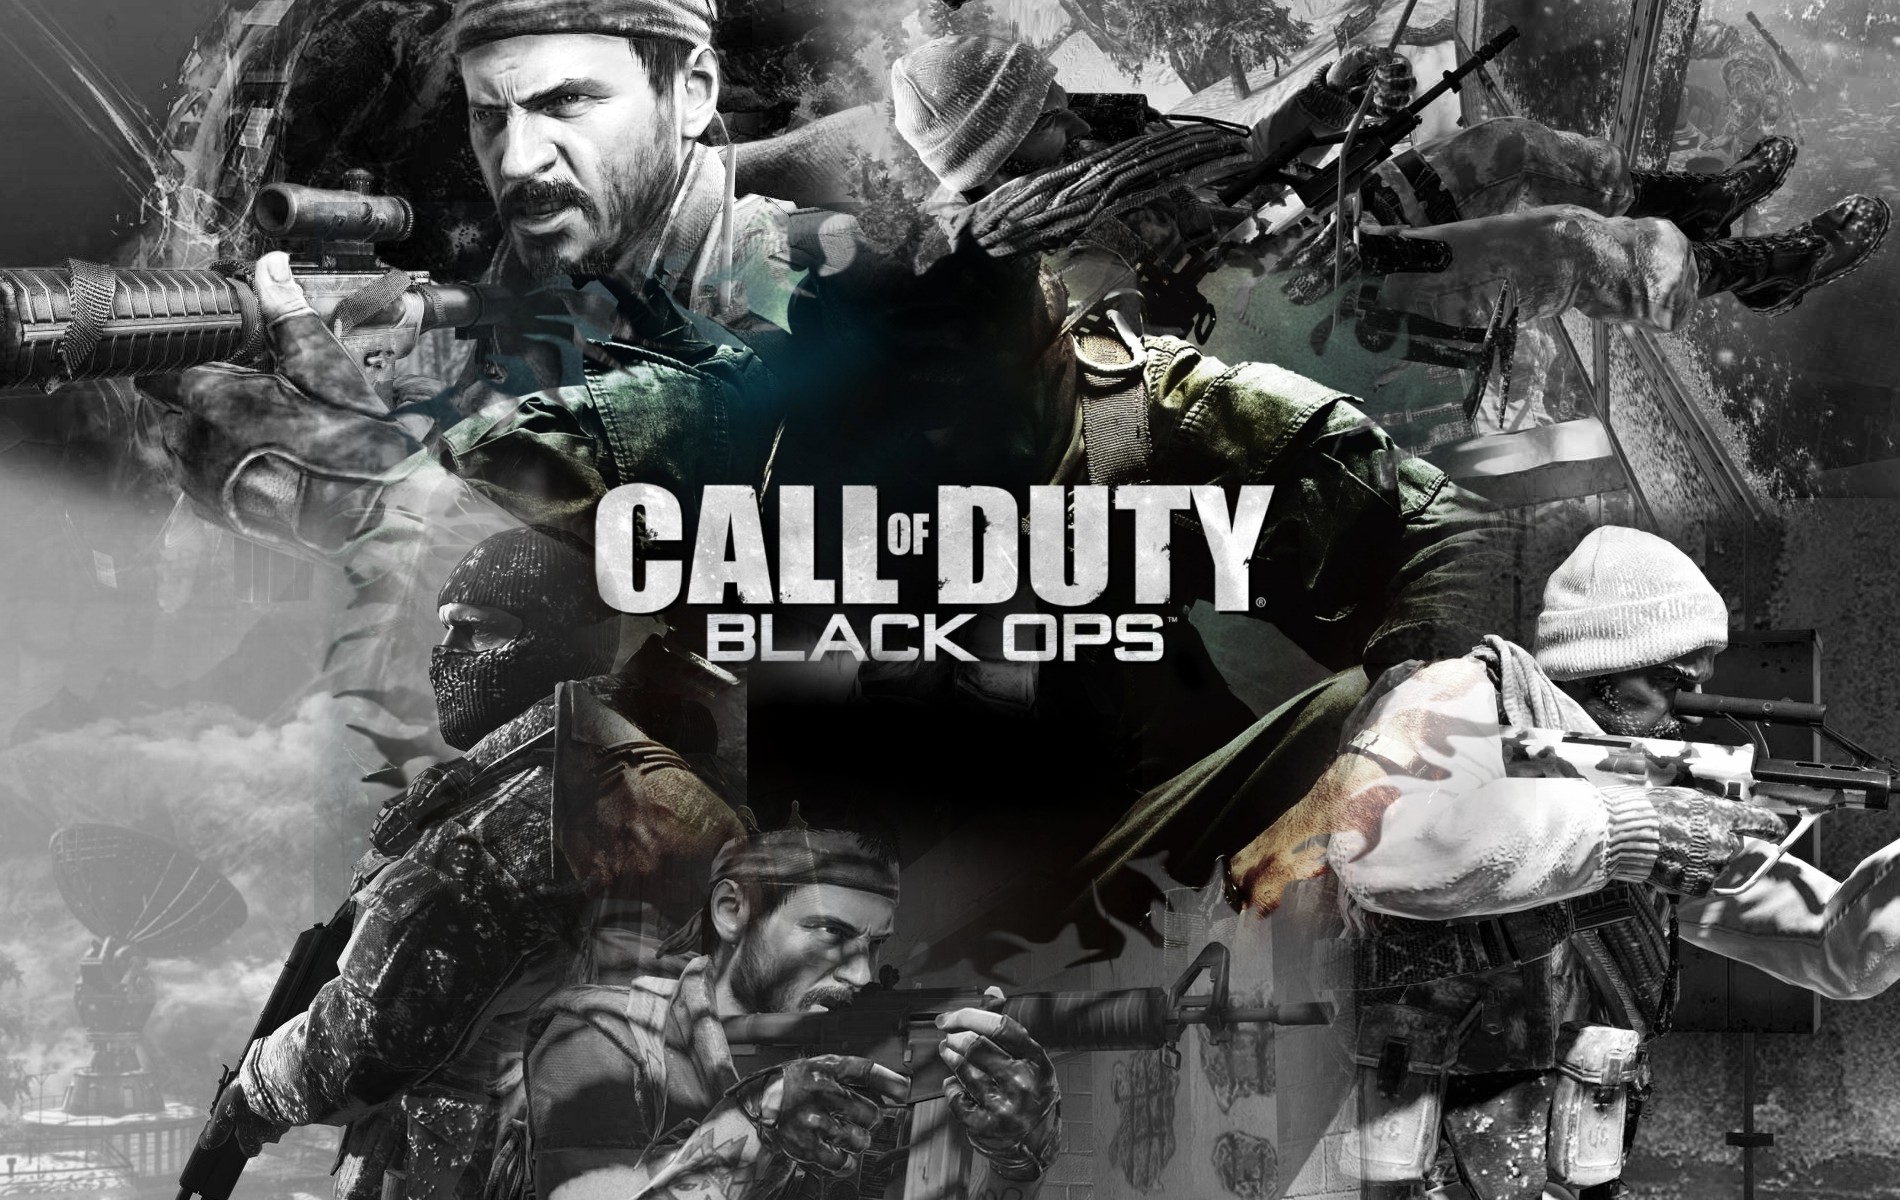  Duty Black Ops You are downloading Call of Duty Black Ops wallpaper